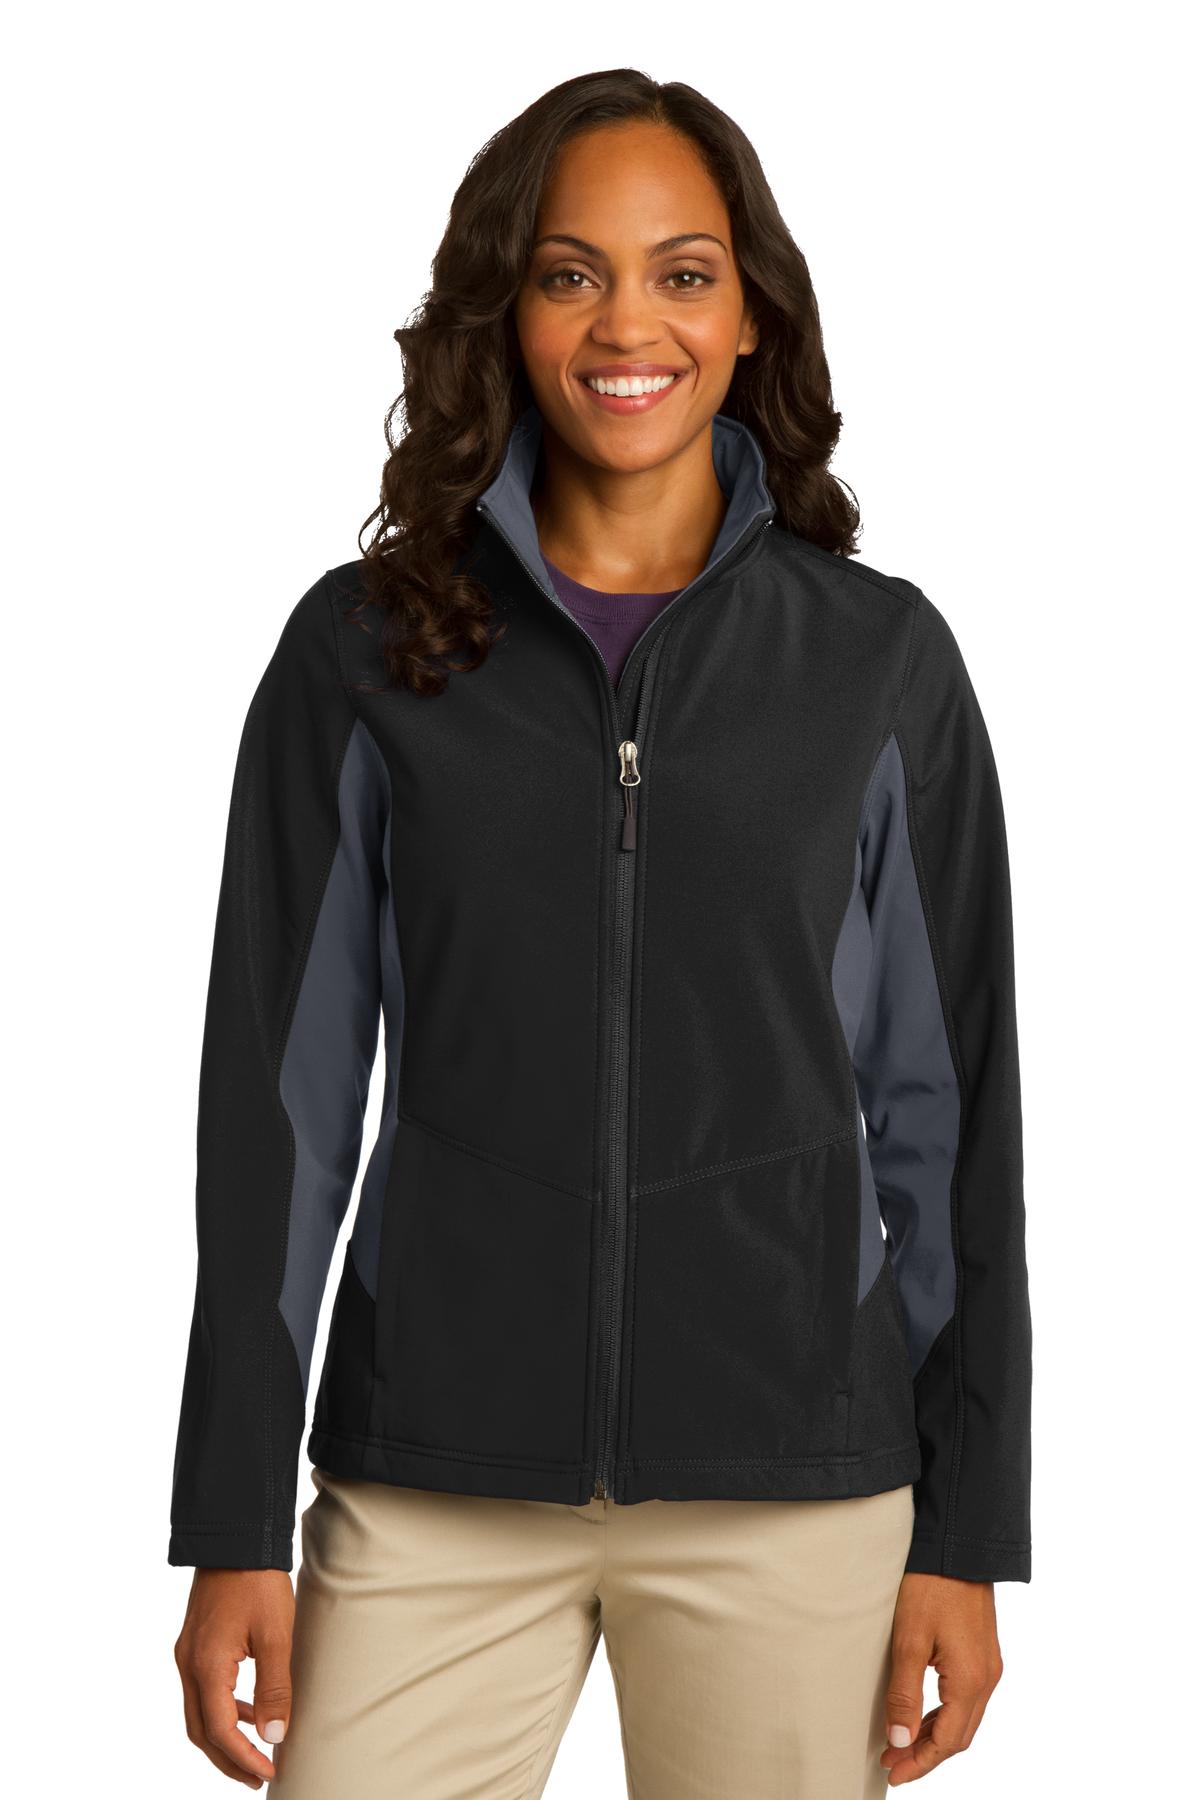 Port Authority Ladies Outerwear for Hospitality ® Ladies Core Colorblock Soft Shell Jacket.-Port Authority